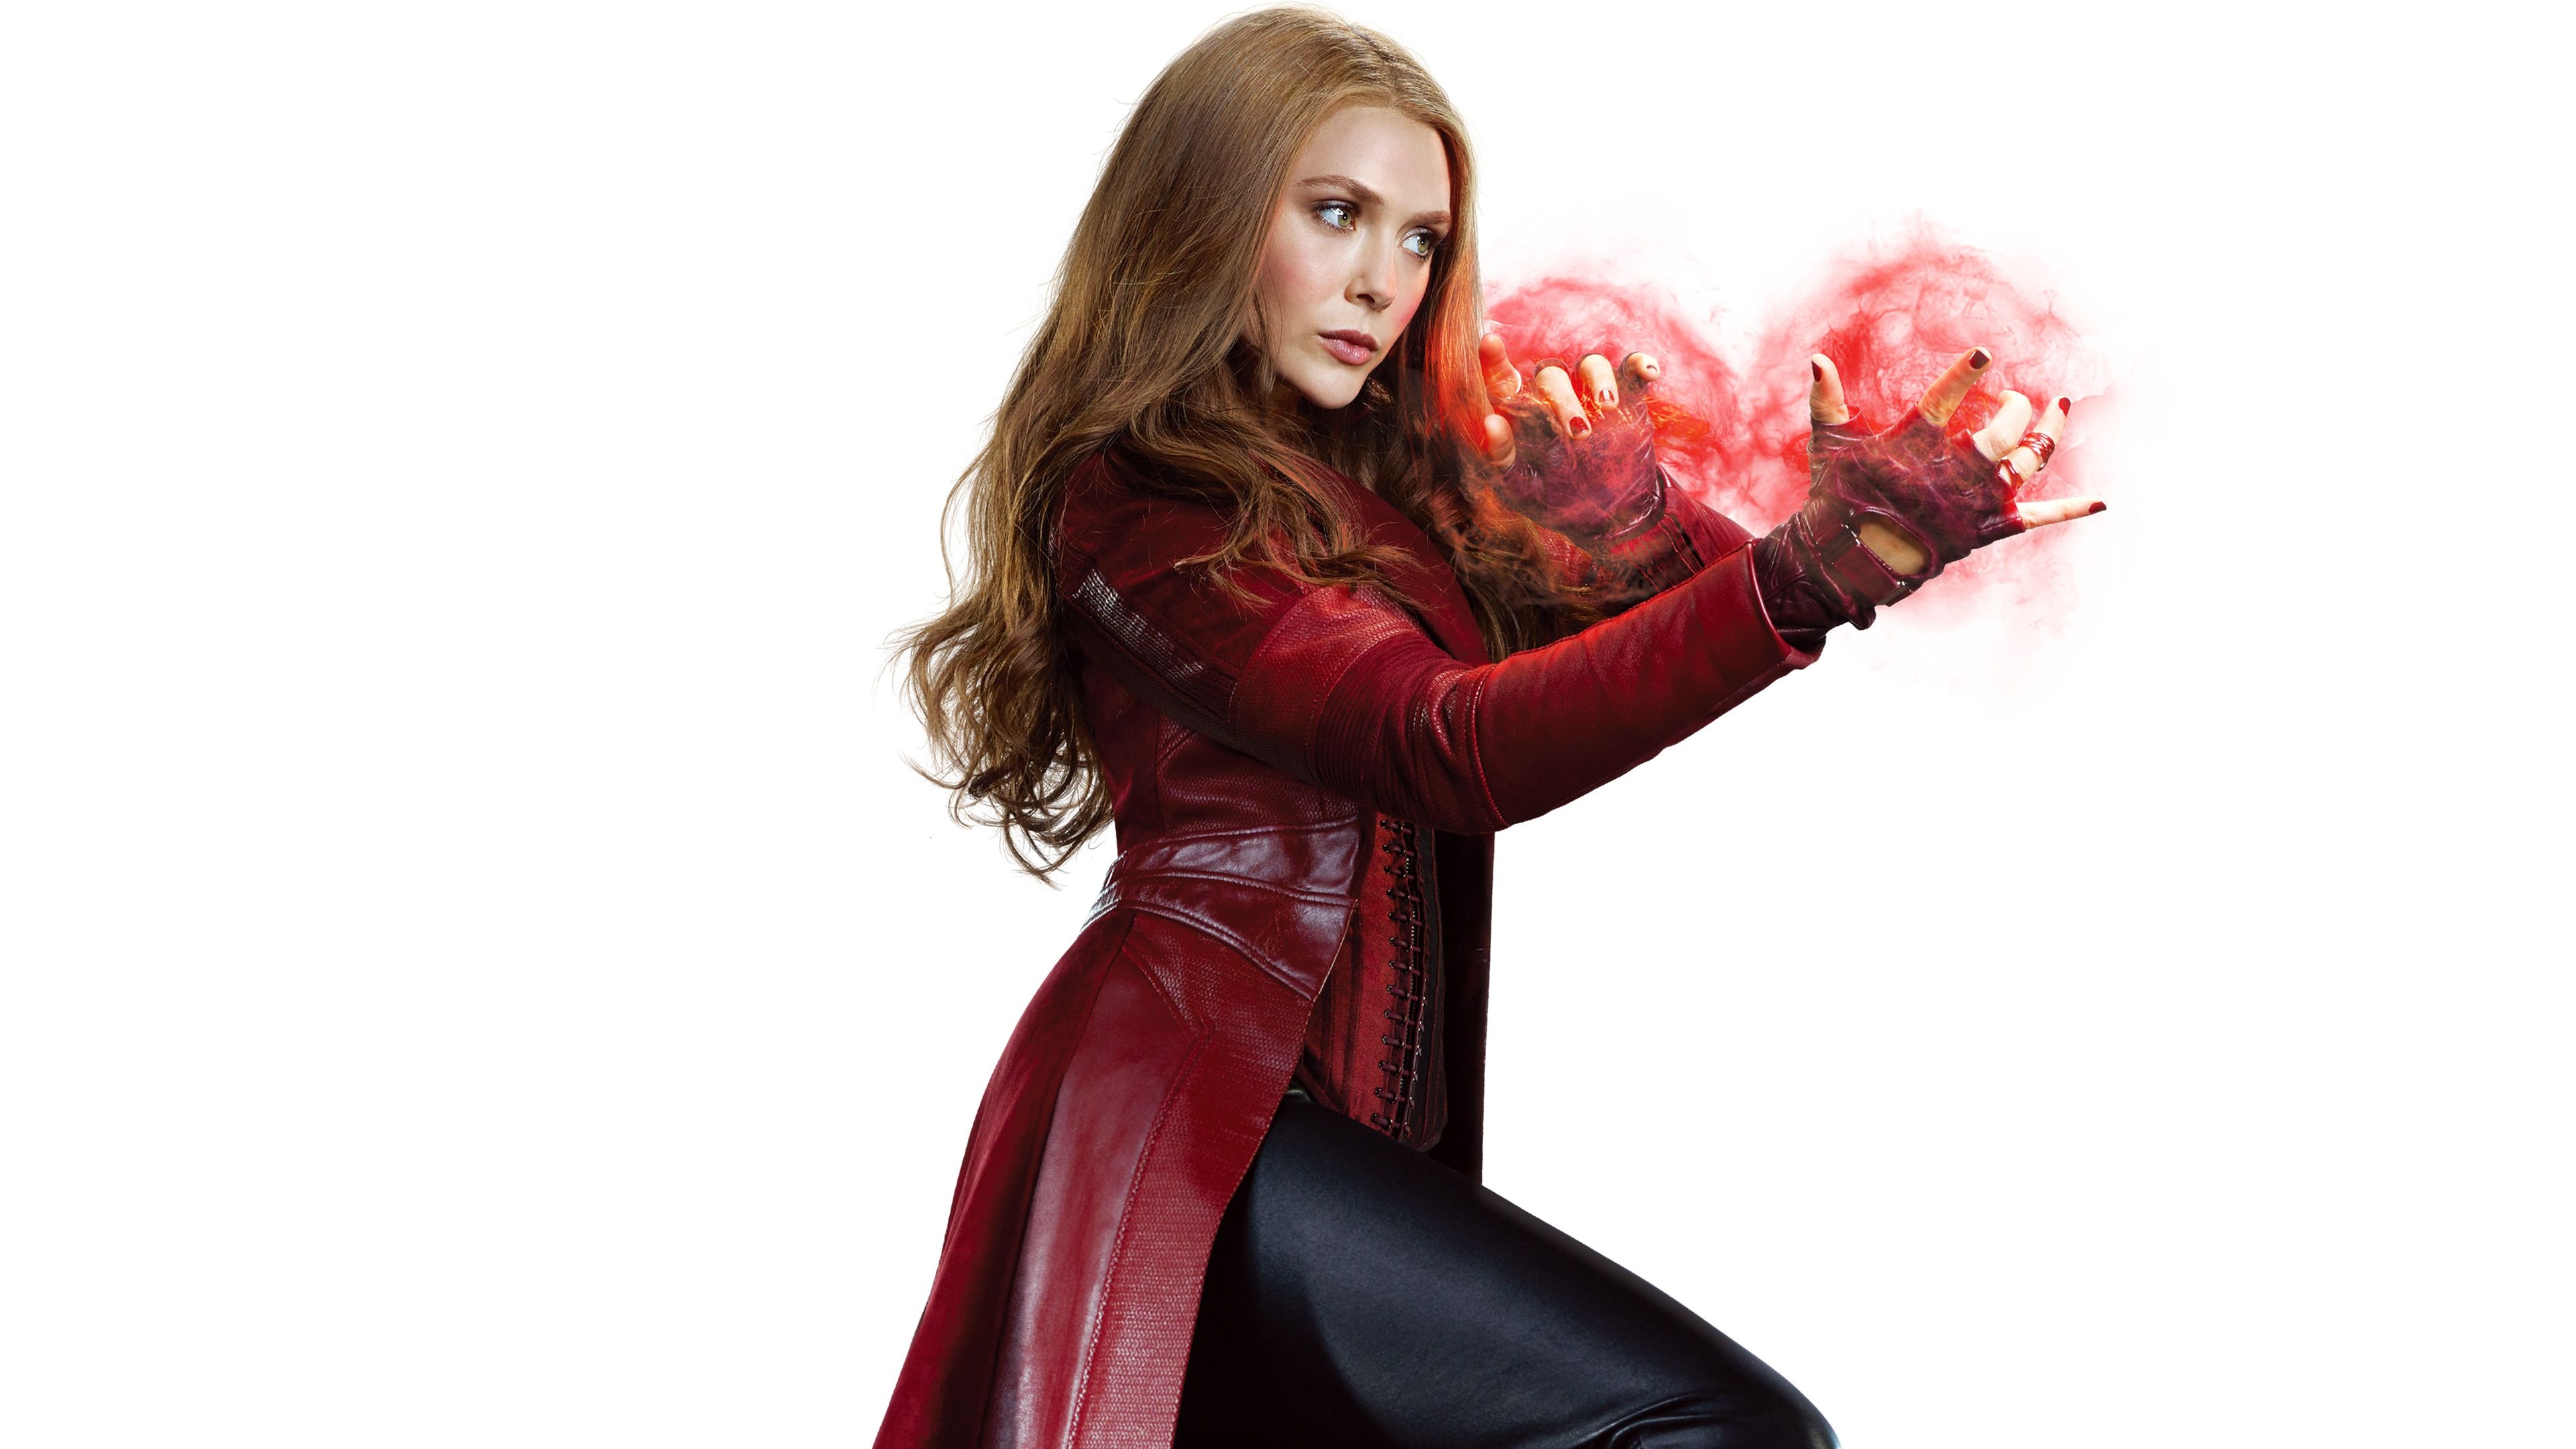 Scarlet Witch, Scarlet Witch wallpapers, HD wallpapers, High-quality images, 3840x2160 4K Desktop